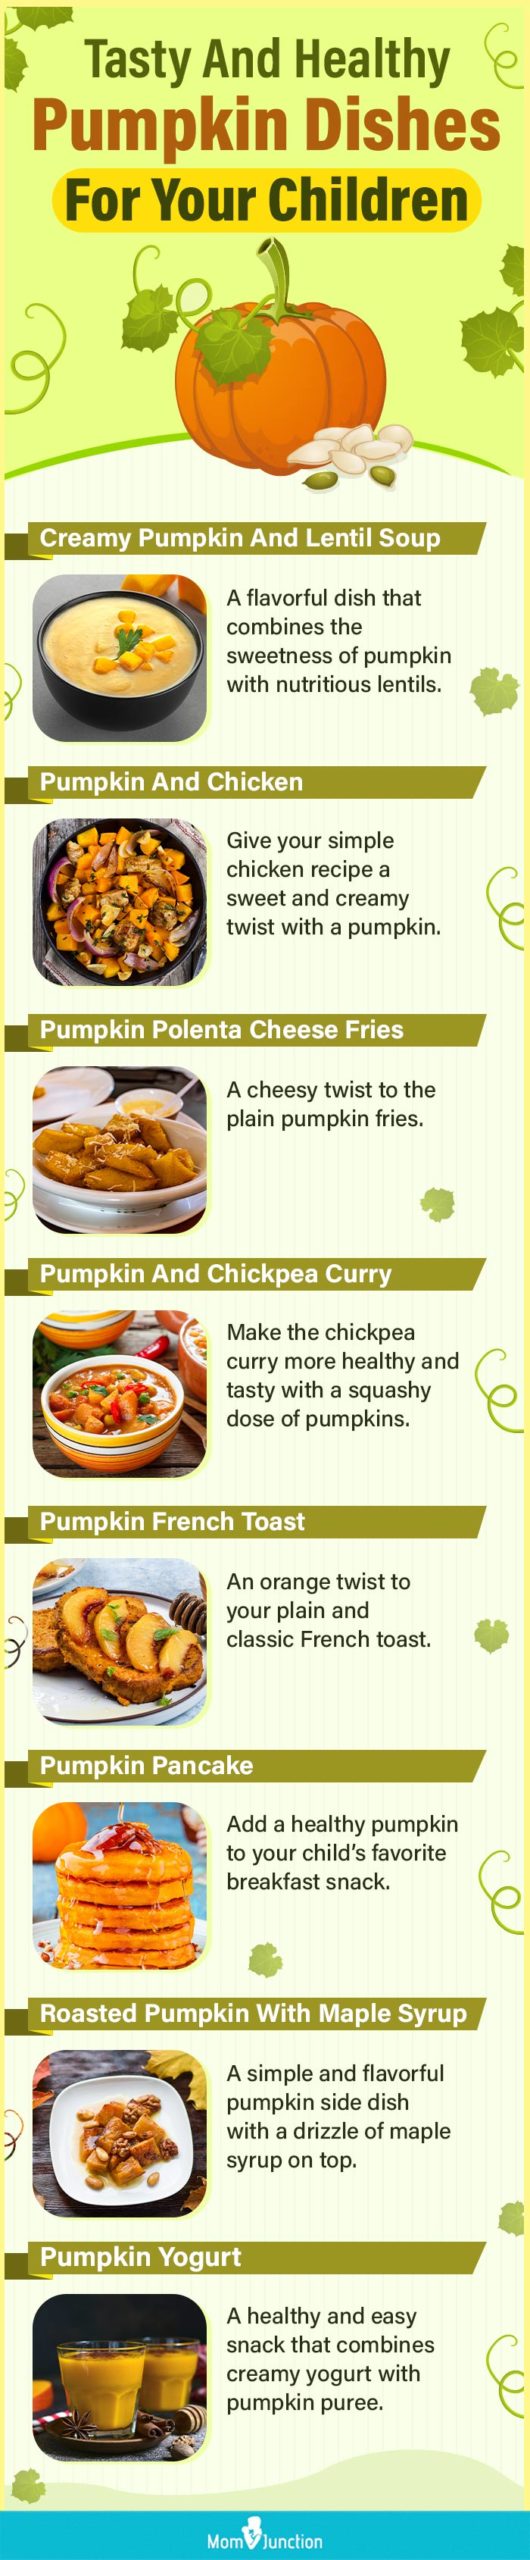 tasty and healthy pumpkin dishes for your children (infographic)